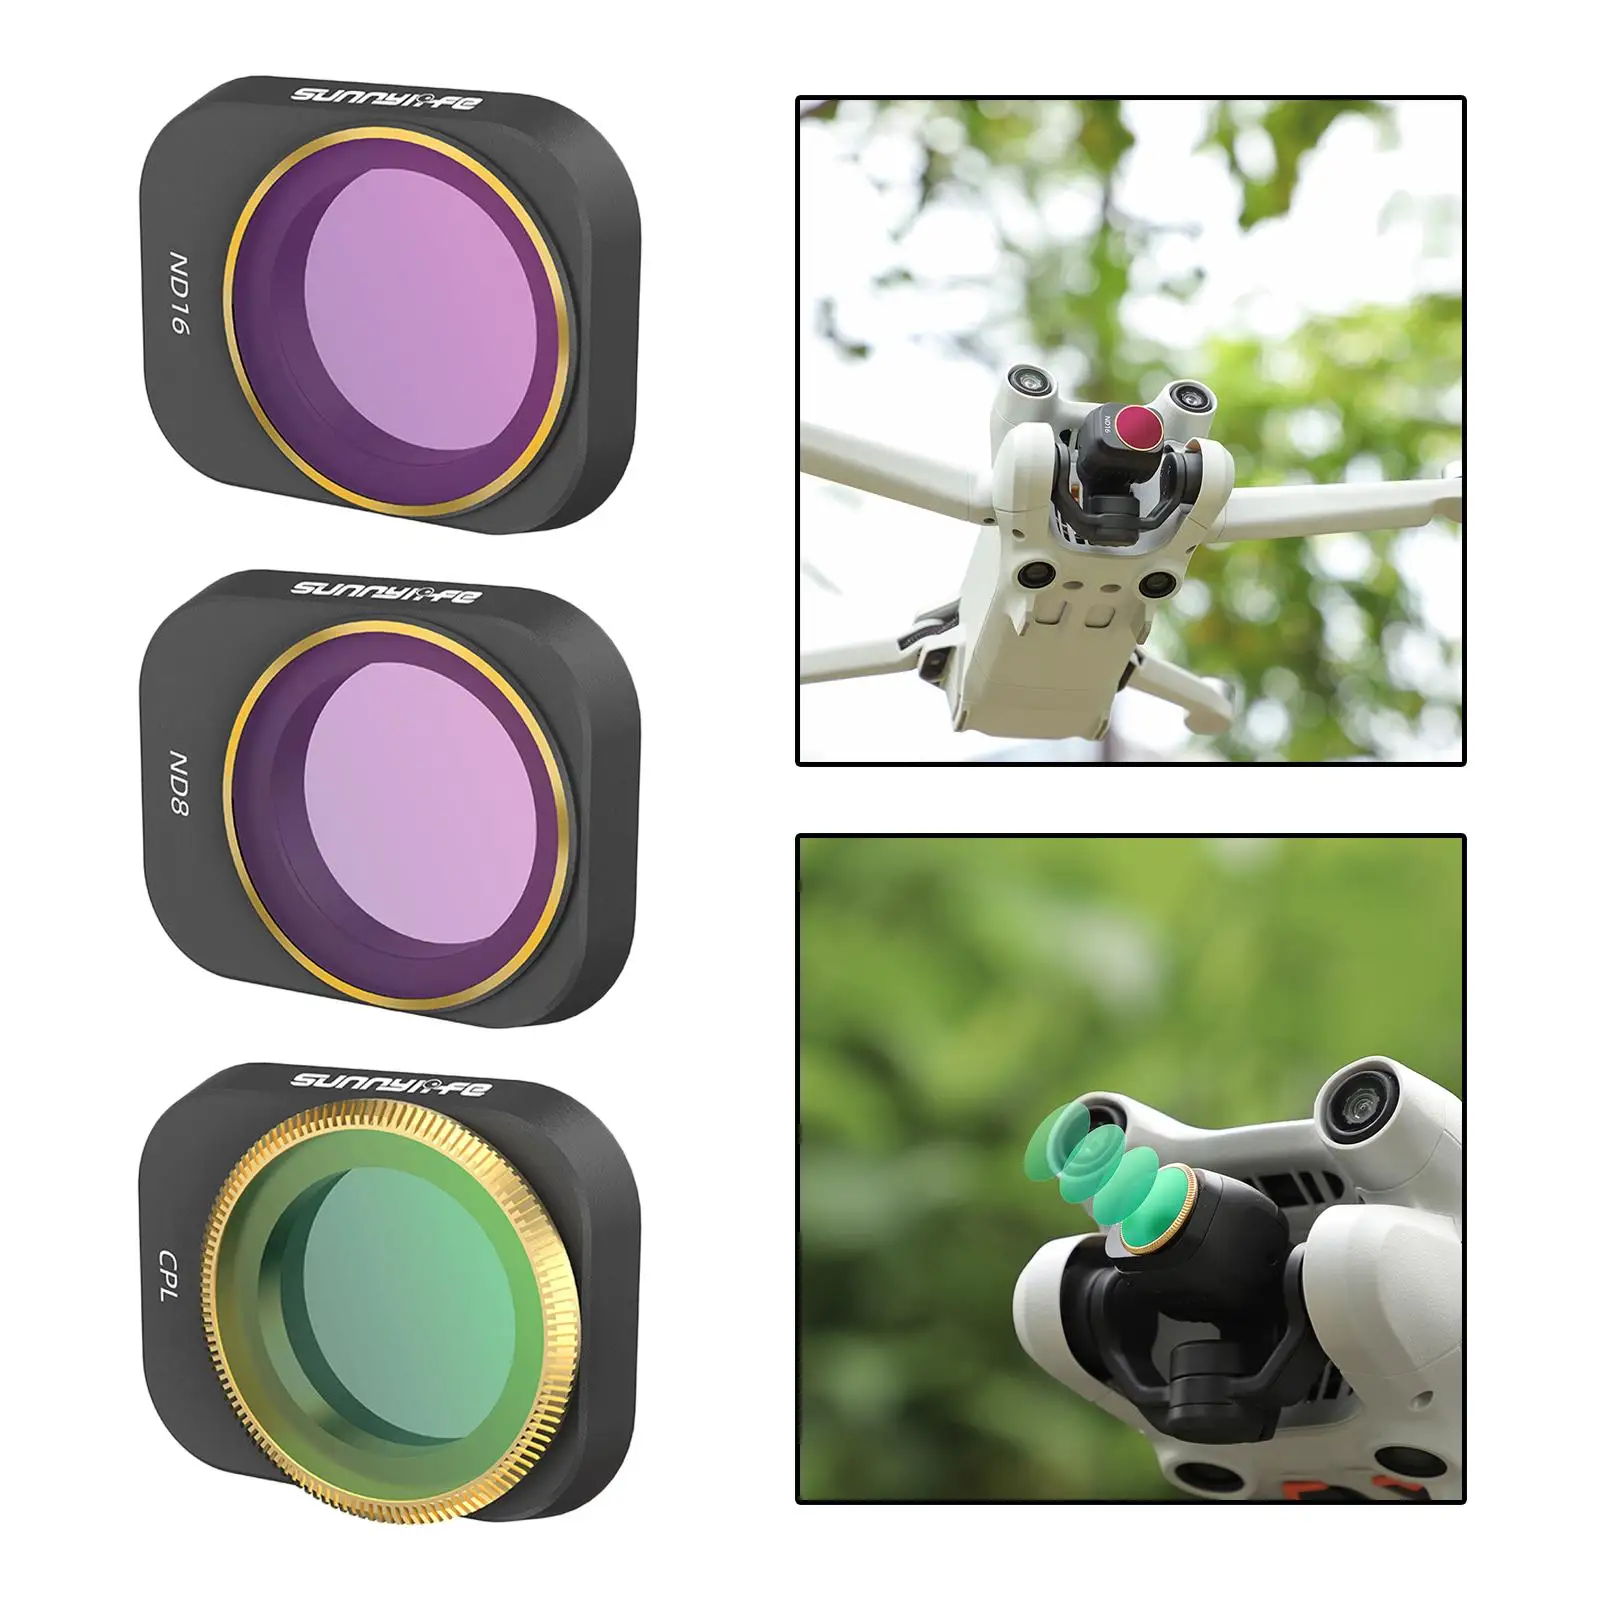 3x Cpl/ND8/ND16 Lens Filters Set for DJI Mini 3 Pro Quadcopter Drone Spare Parts